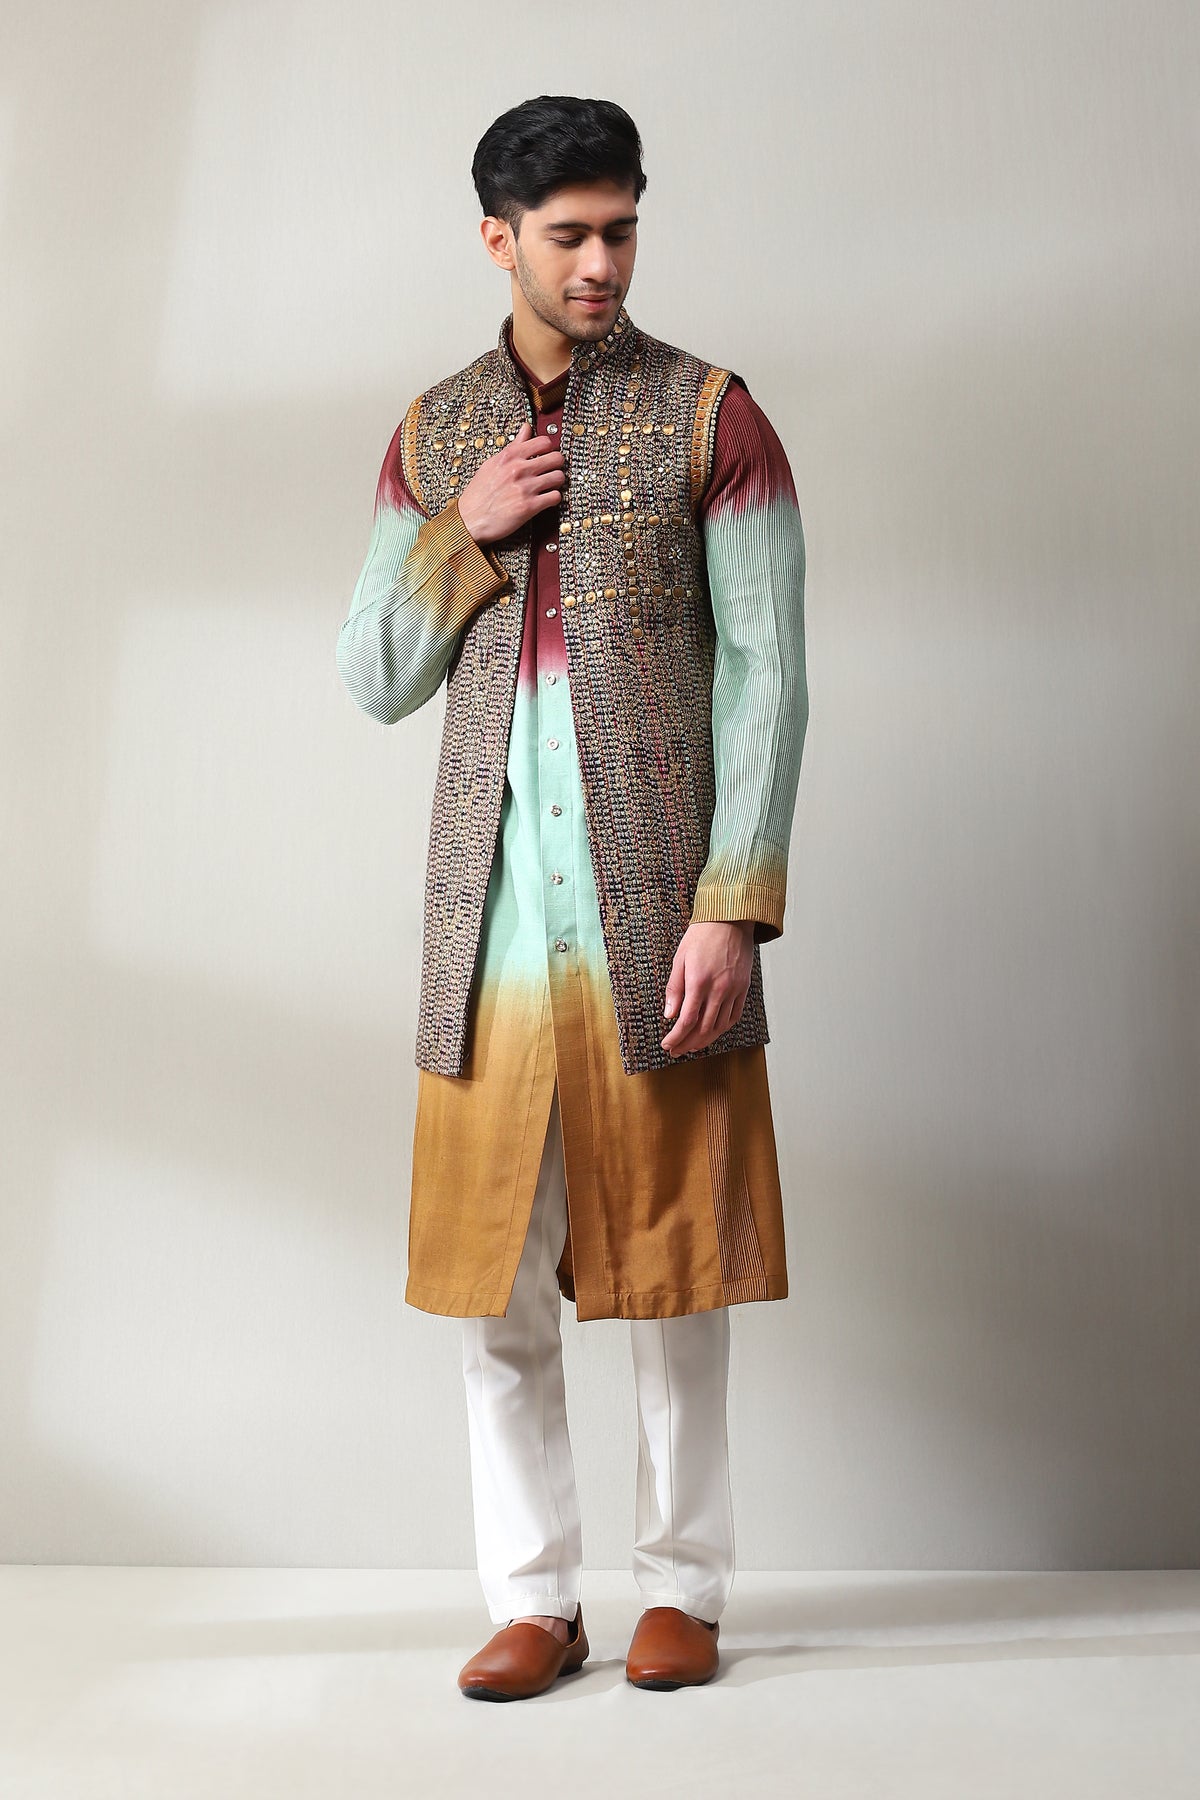 This handloom multicoloured open long sleeveless jacket with the slim pants